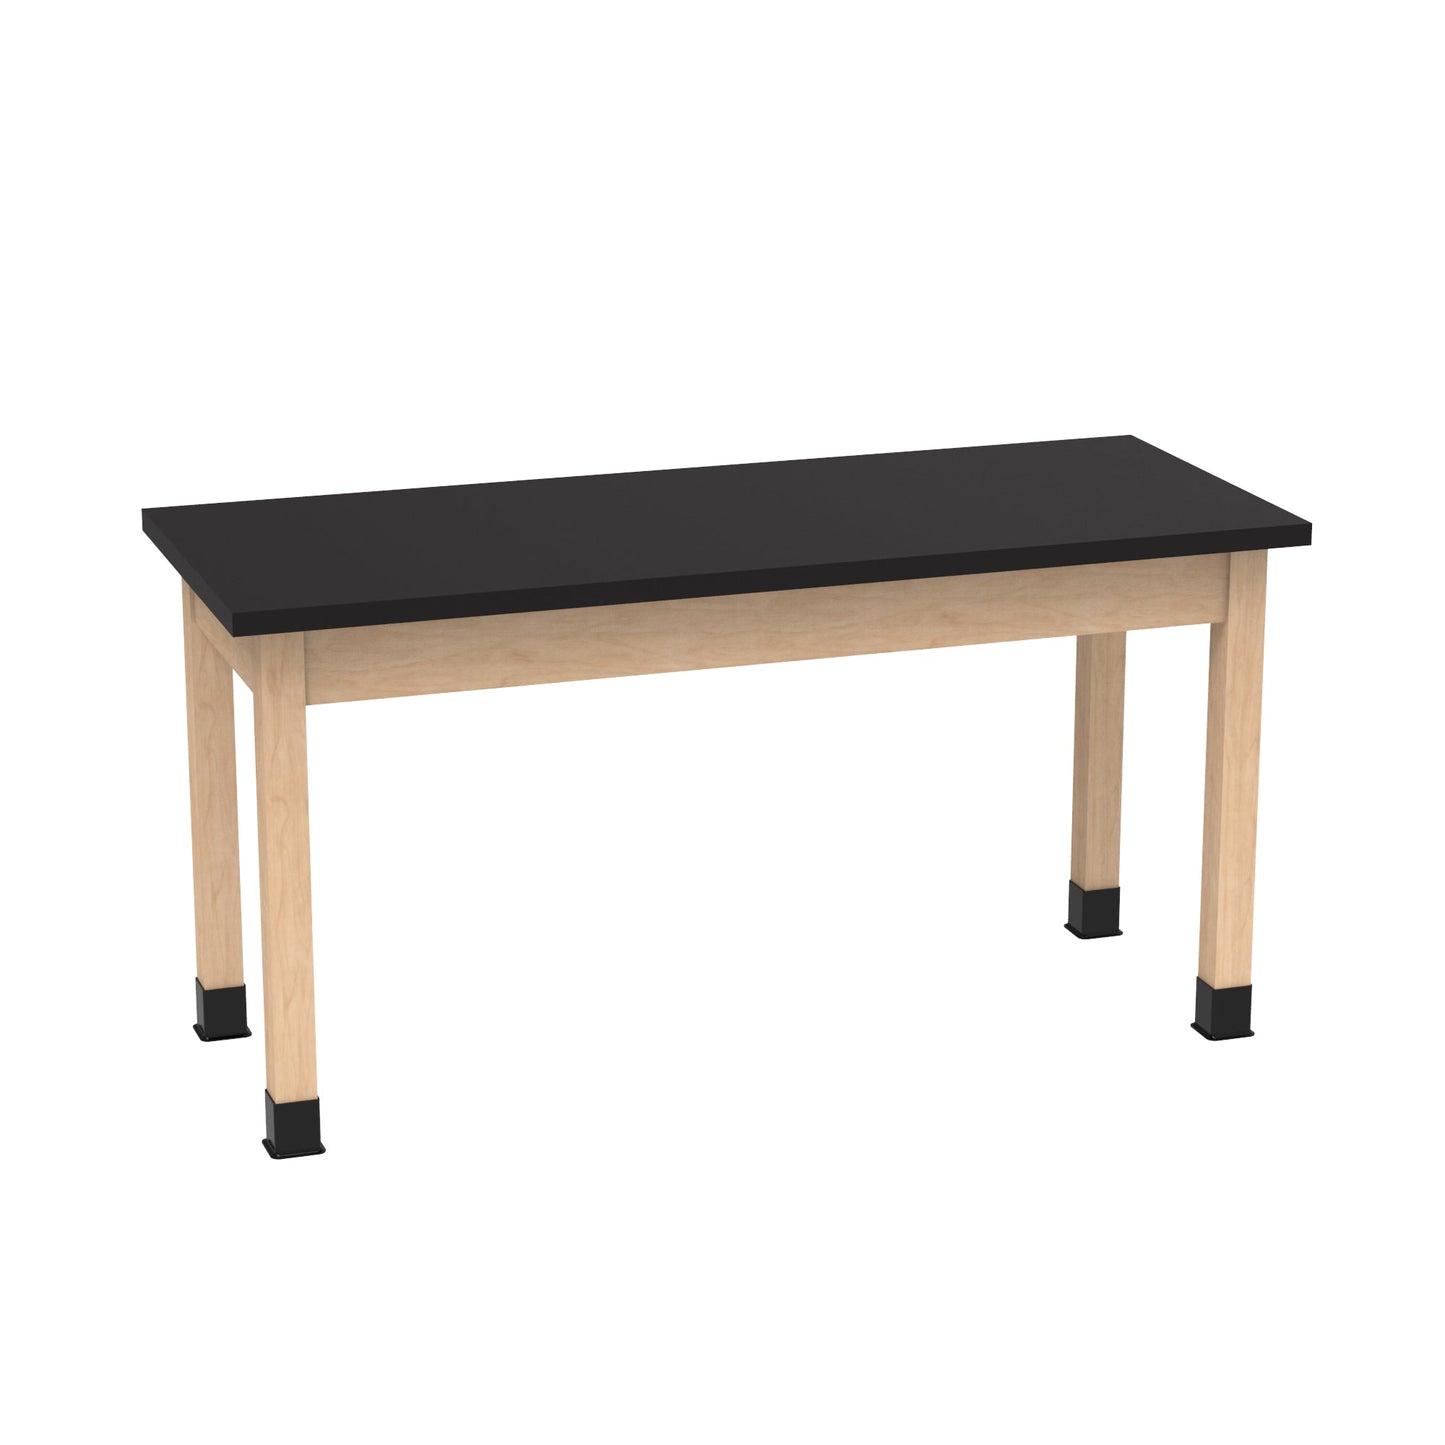 Diversified Woodcrafts Science Table - Plain Apron - 48" W x 21" D - Solid Wood Frame and Adjustable Glides - SchoolOutlet